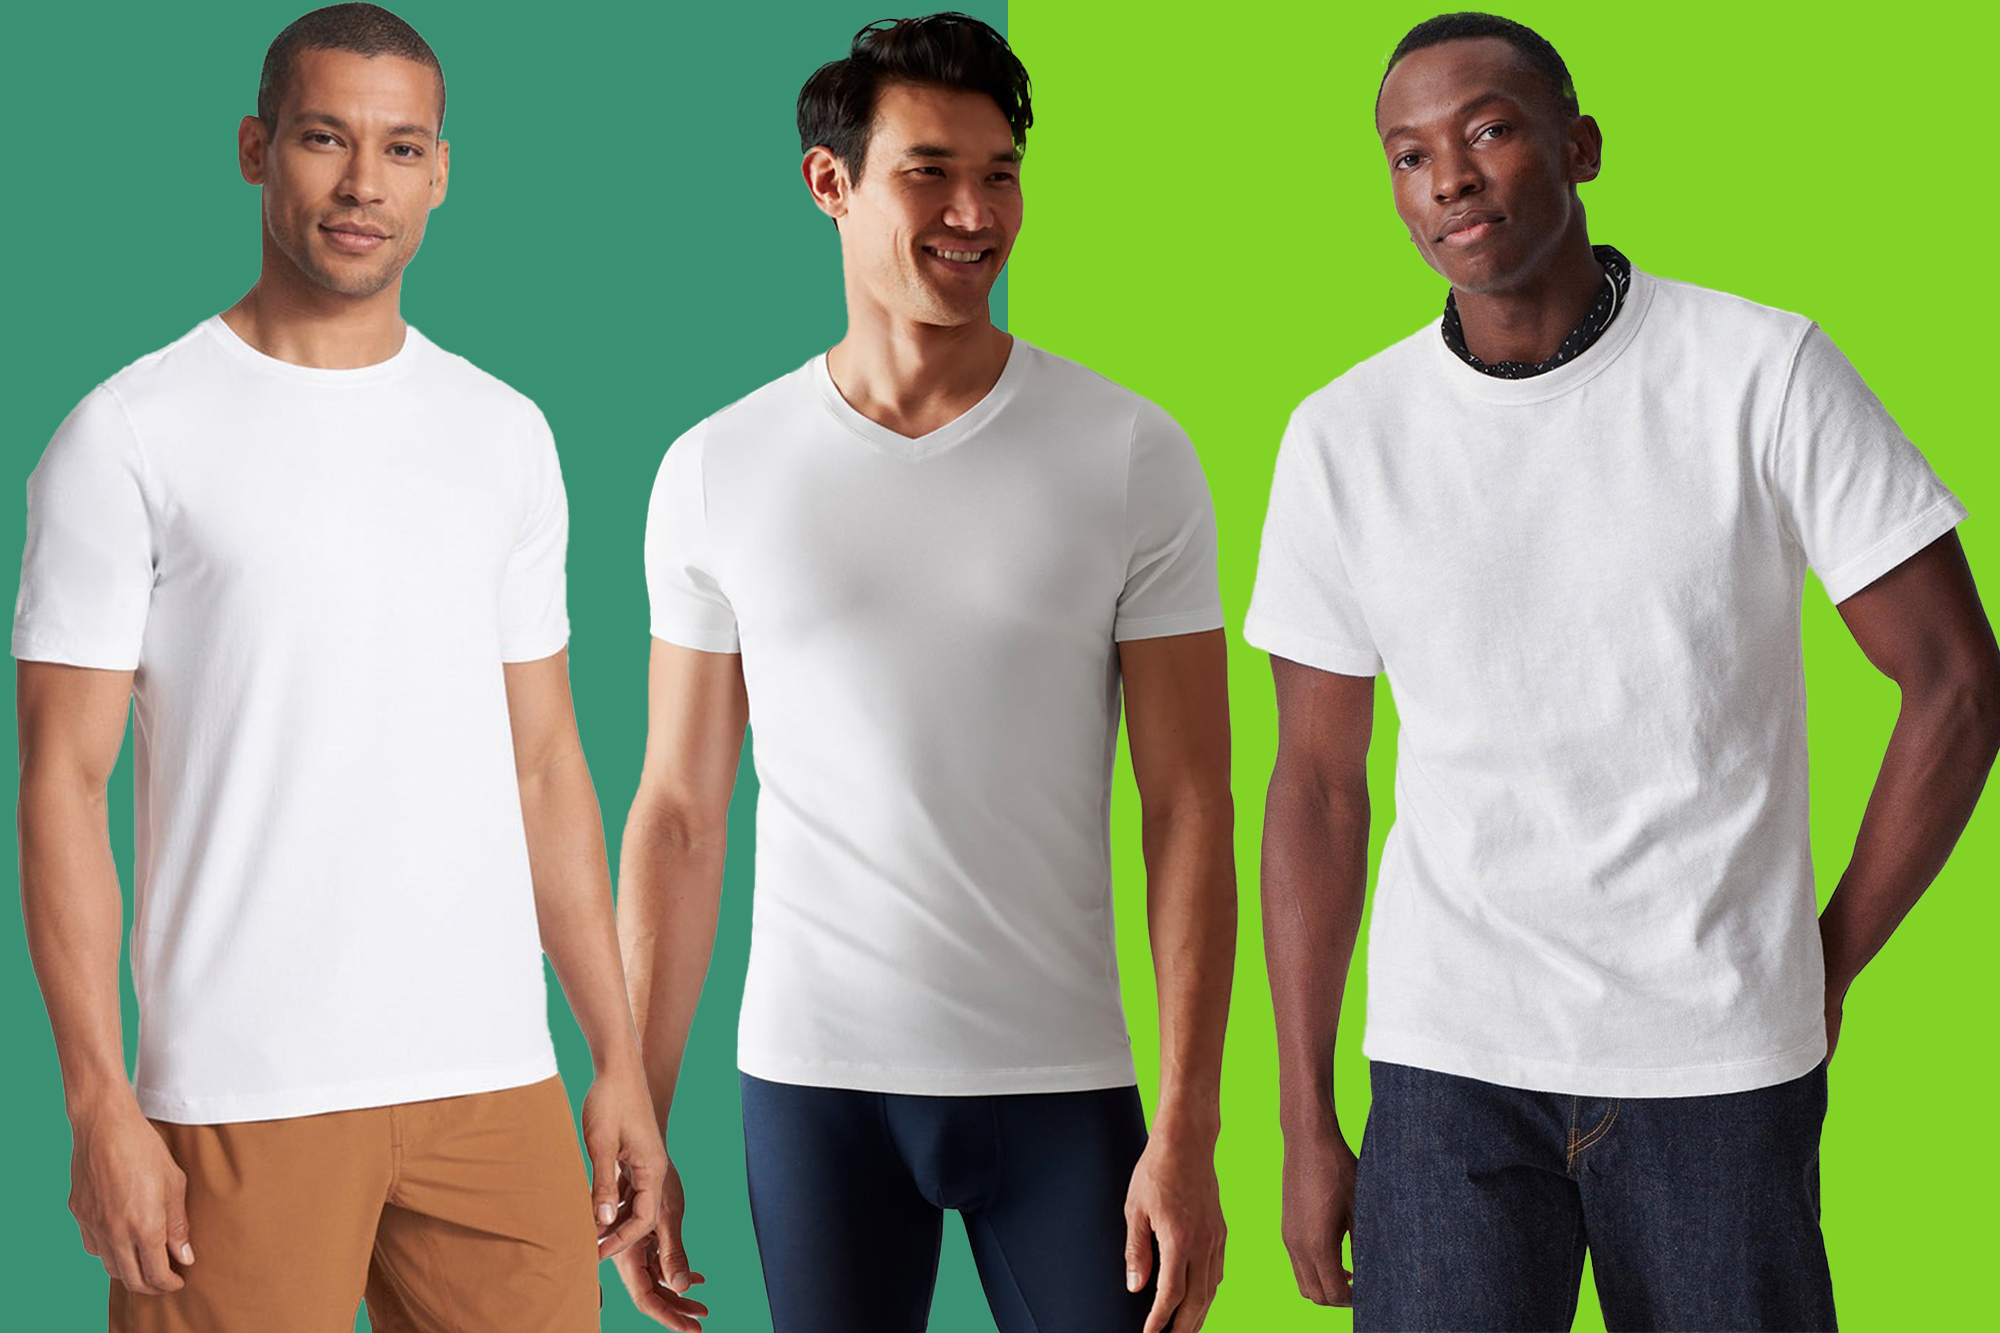 The 14 best undershirts for men, according to style experts